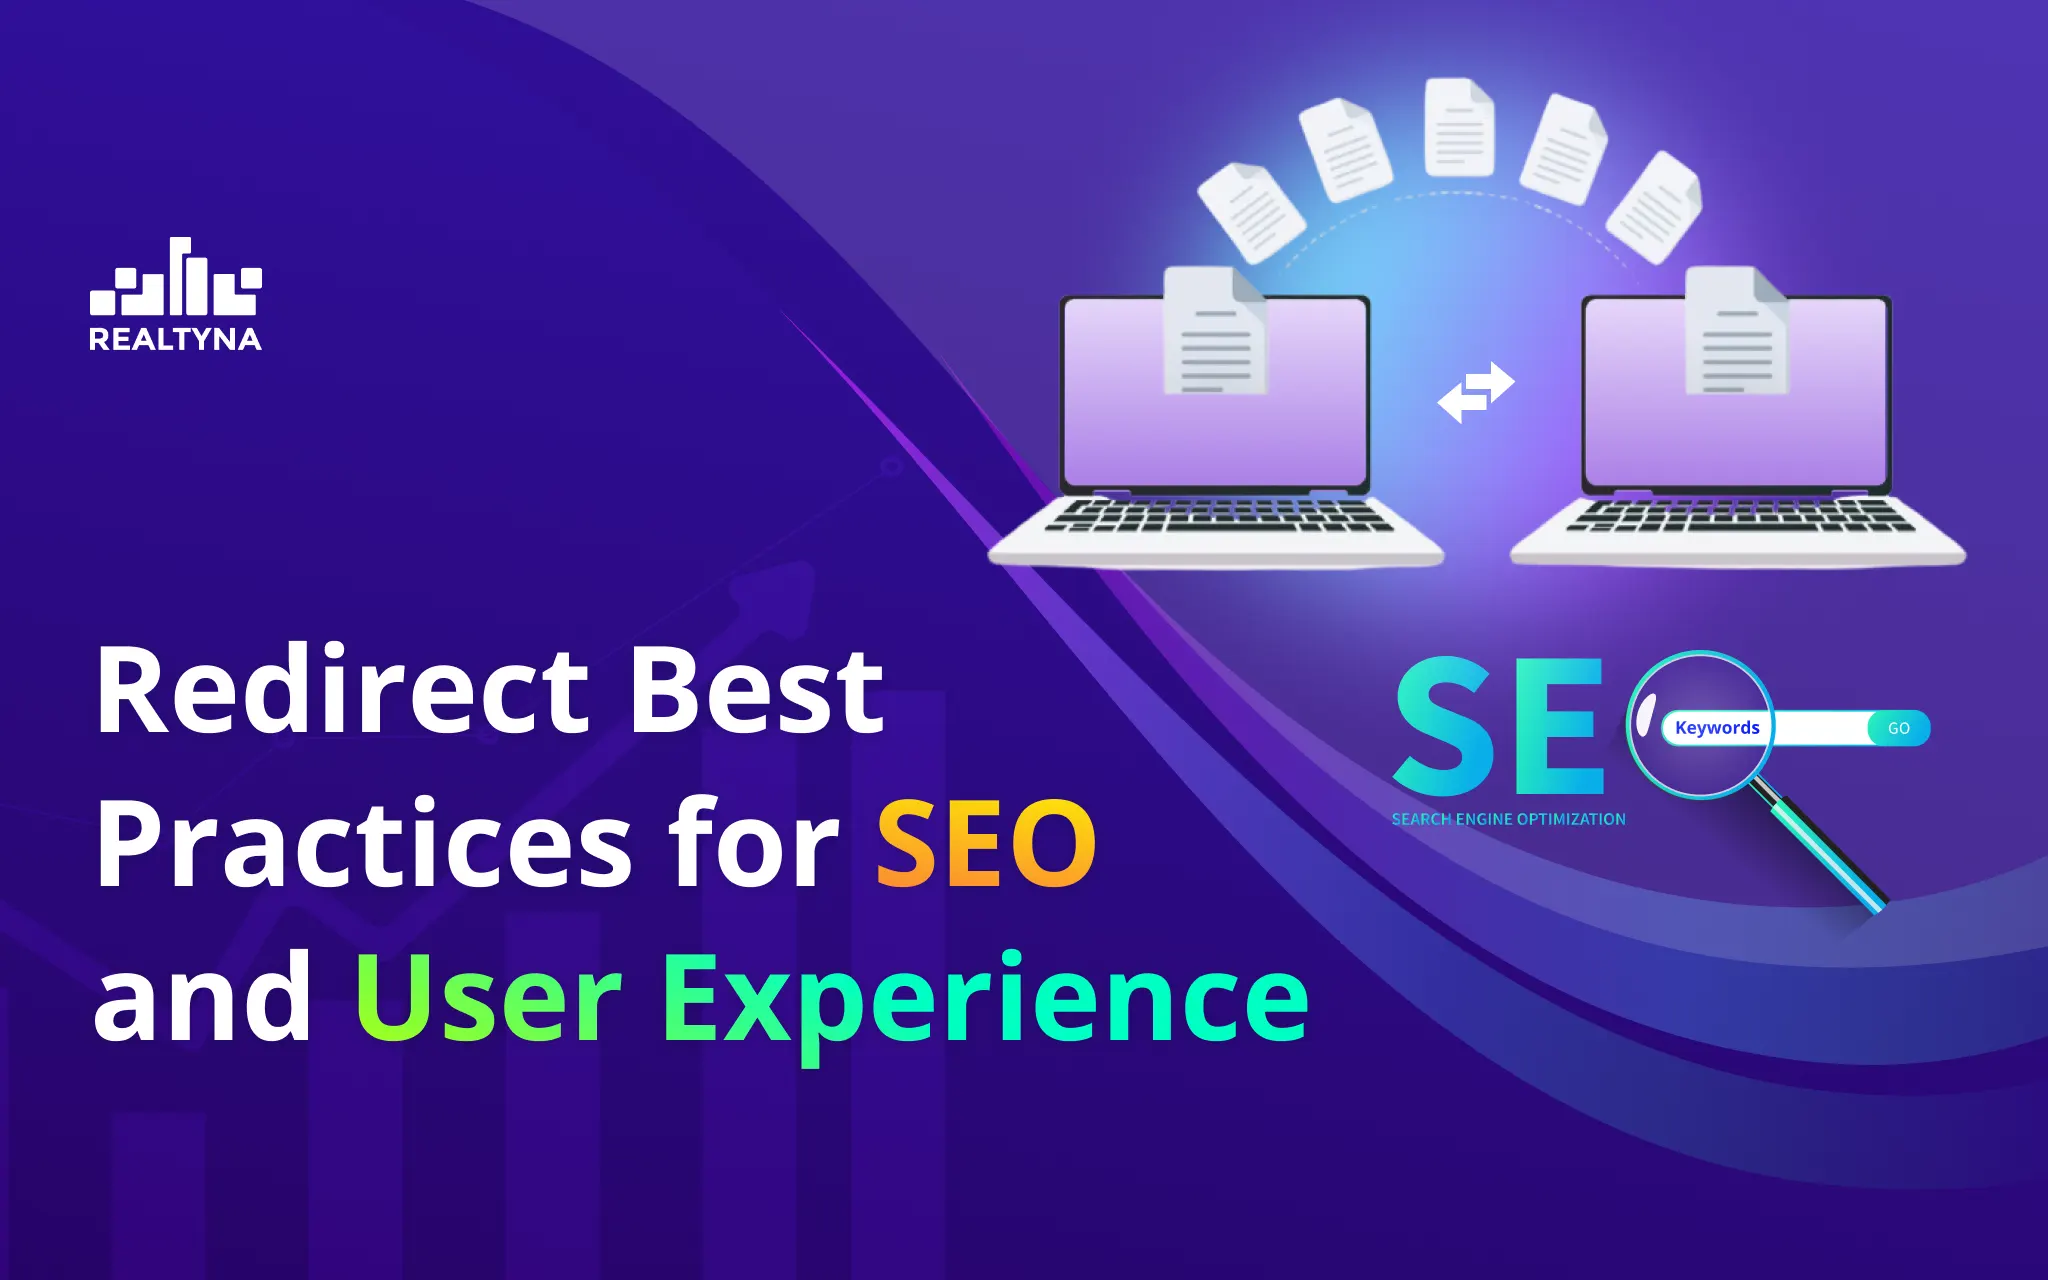 Redirect Best Practices for SEO and User Experience